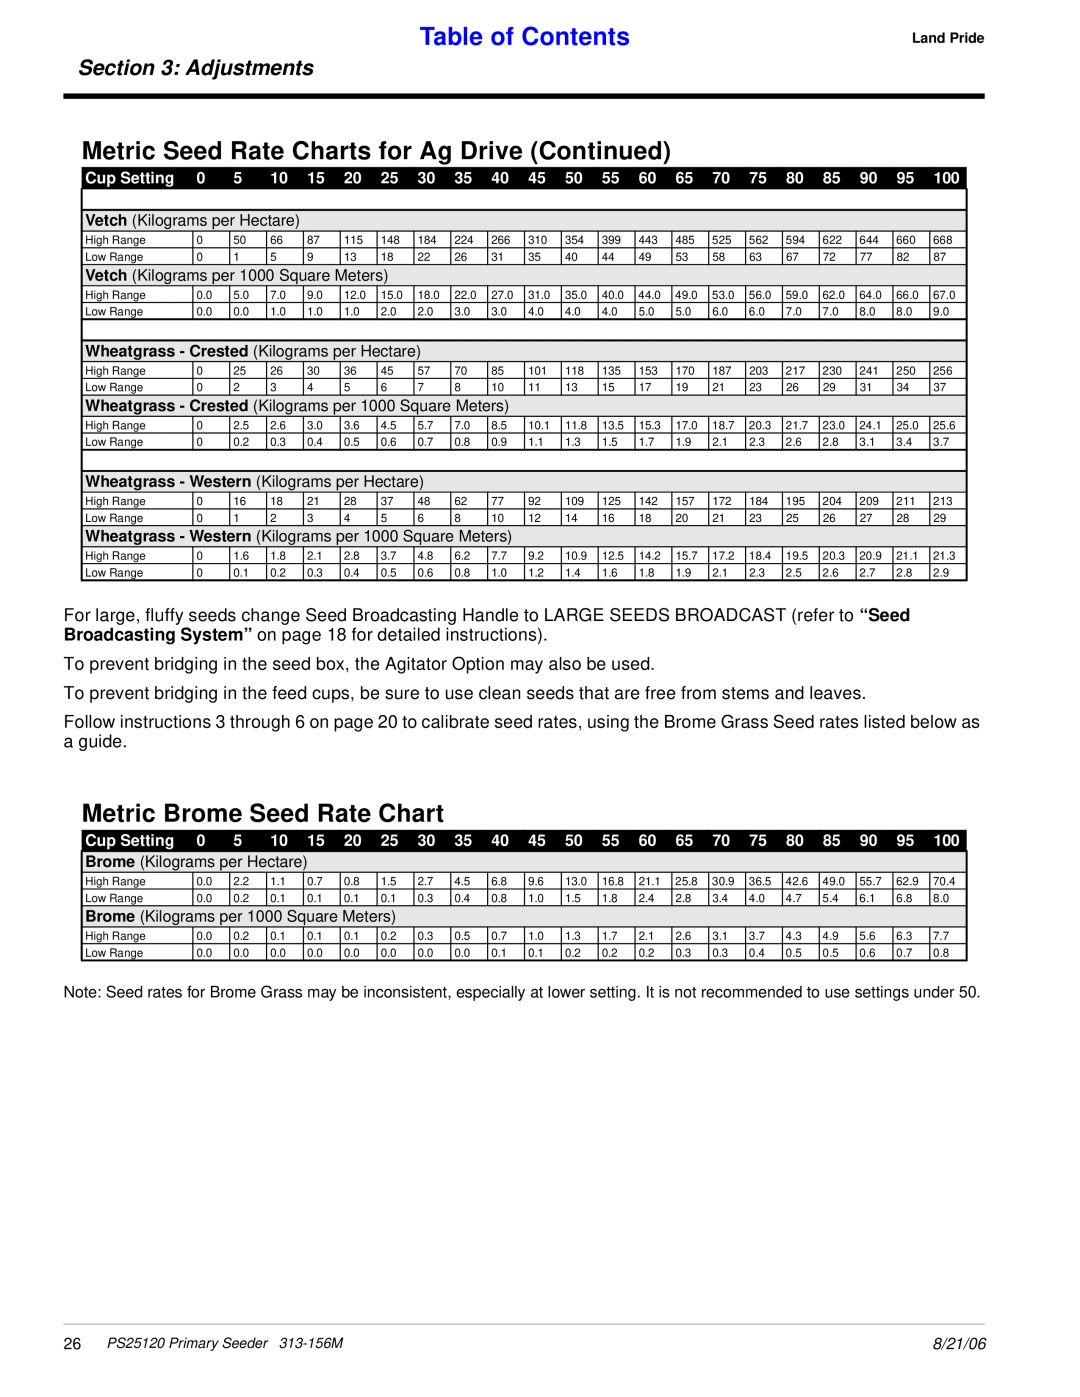 Land Pride PS25120 manual Metric Brome Seed Rate Chart, Table of Contents, Metric Seed Rate Charts for Ag Drive Continued 